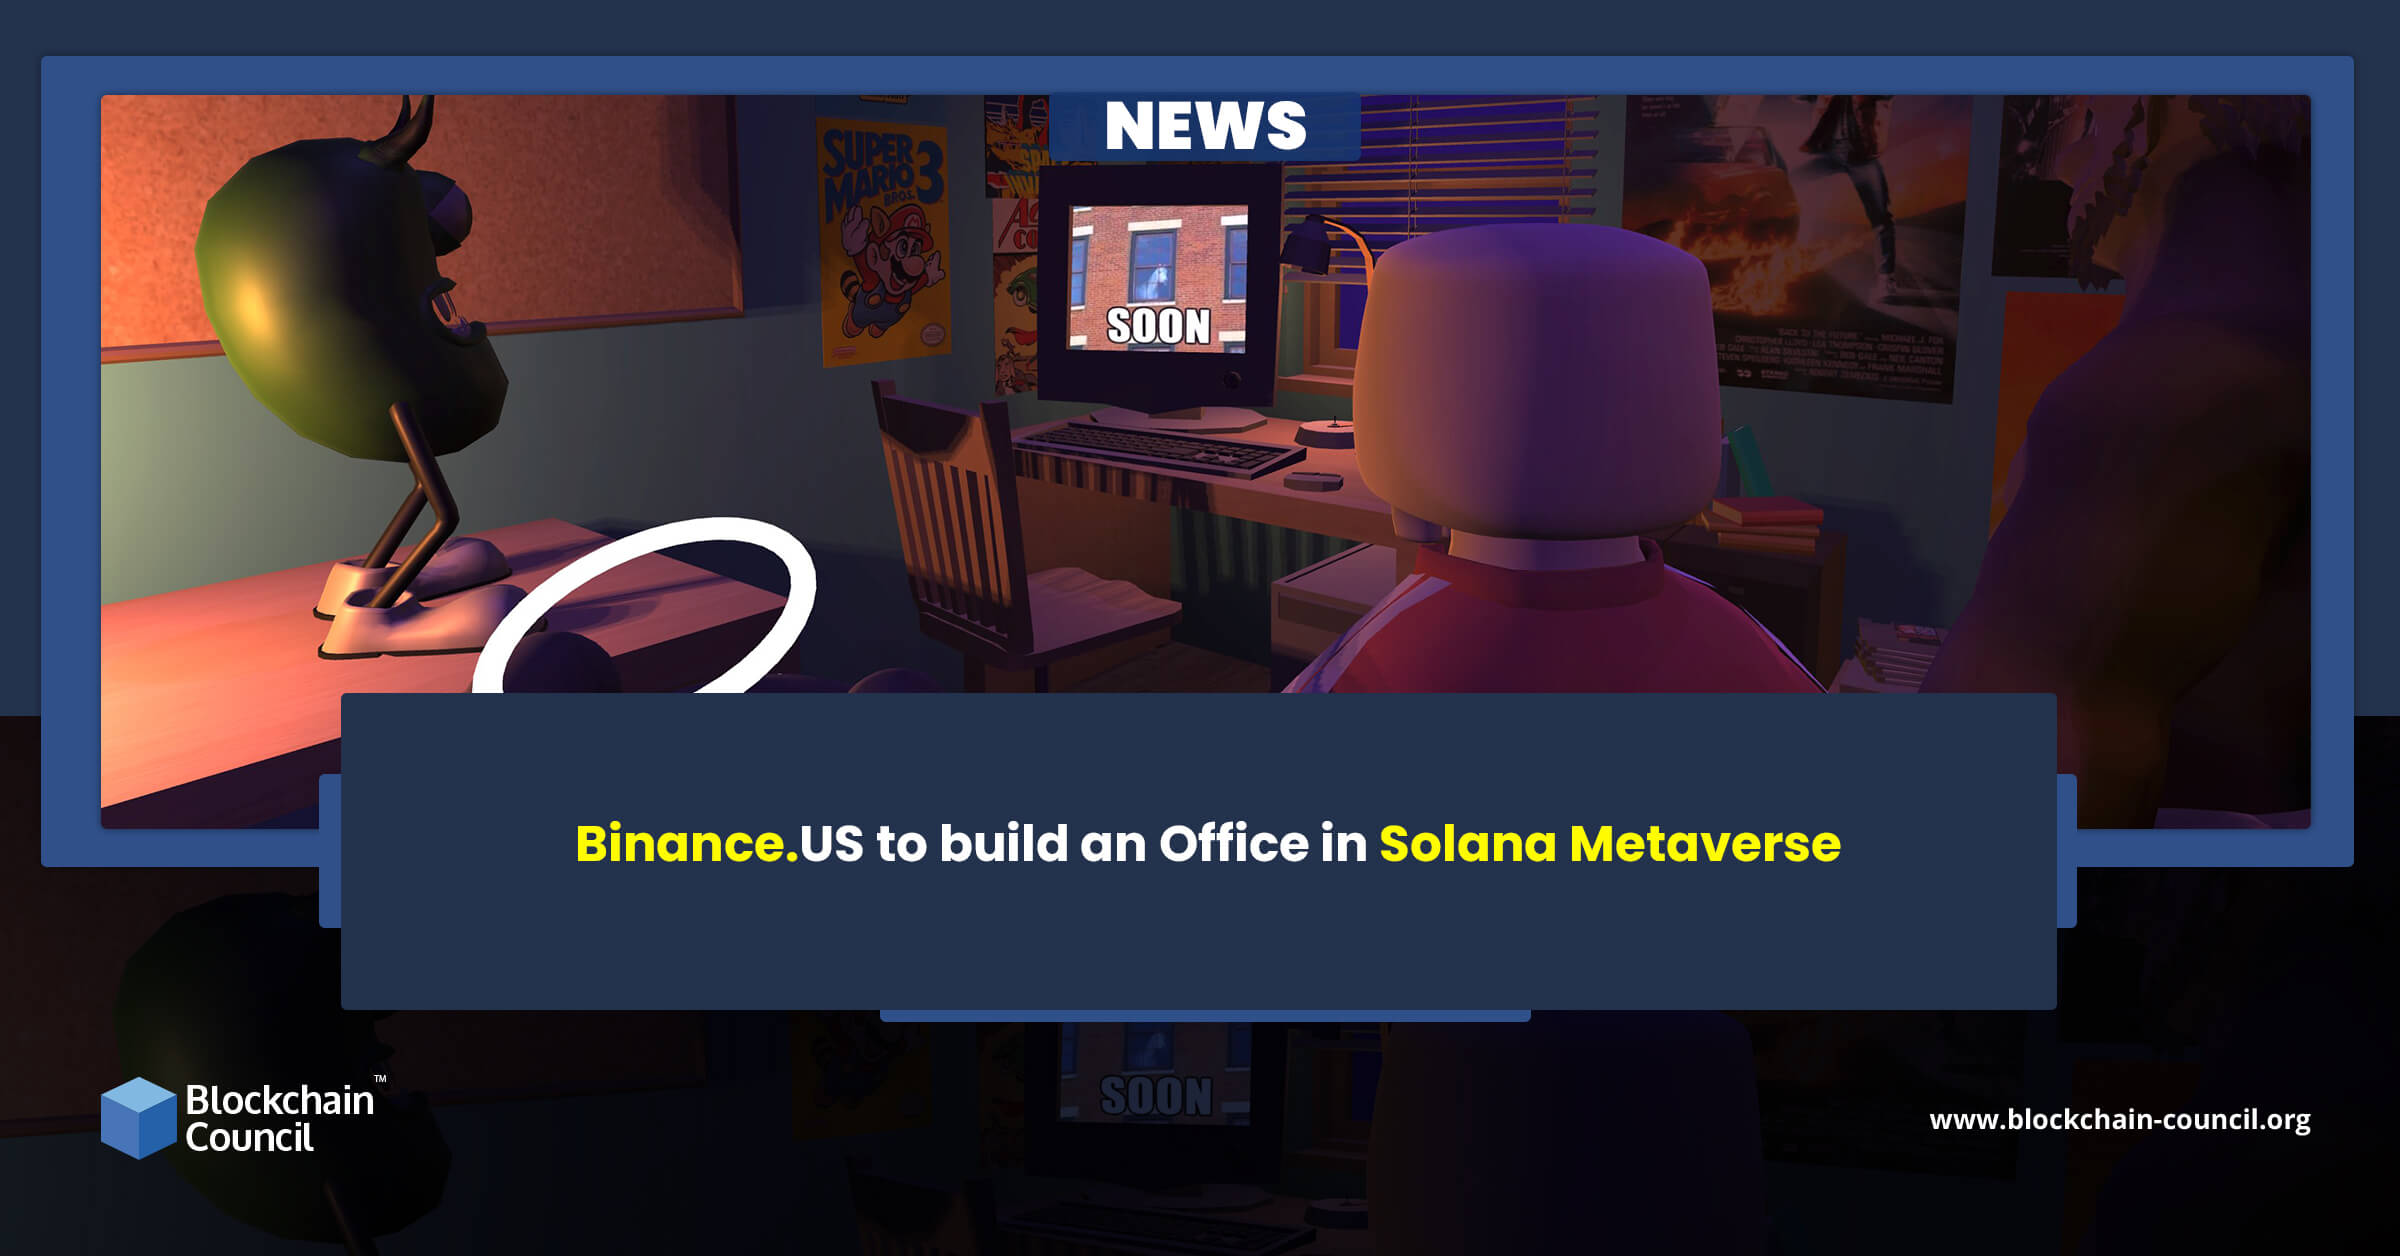 Binance.US to build an Office in Solana Metaverse